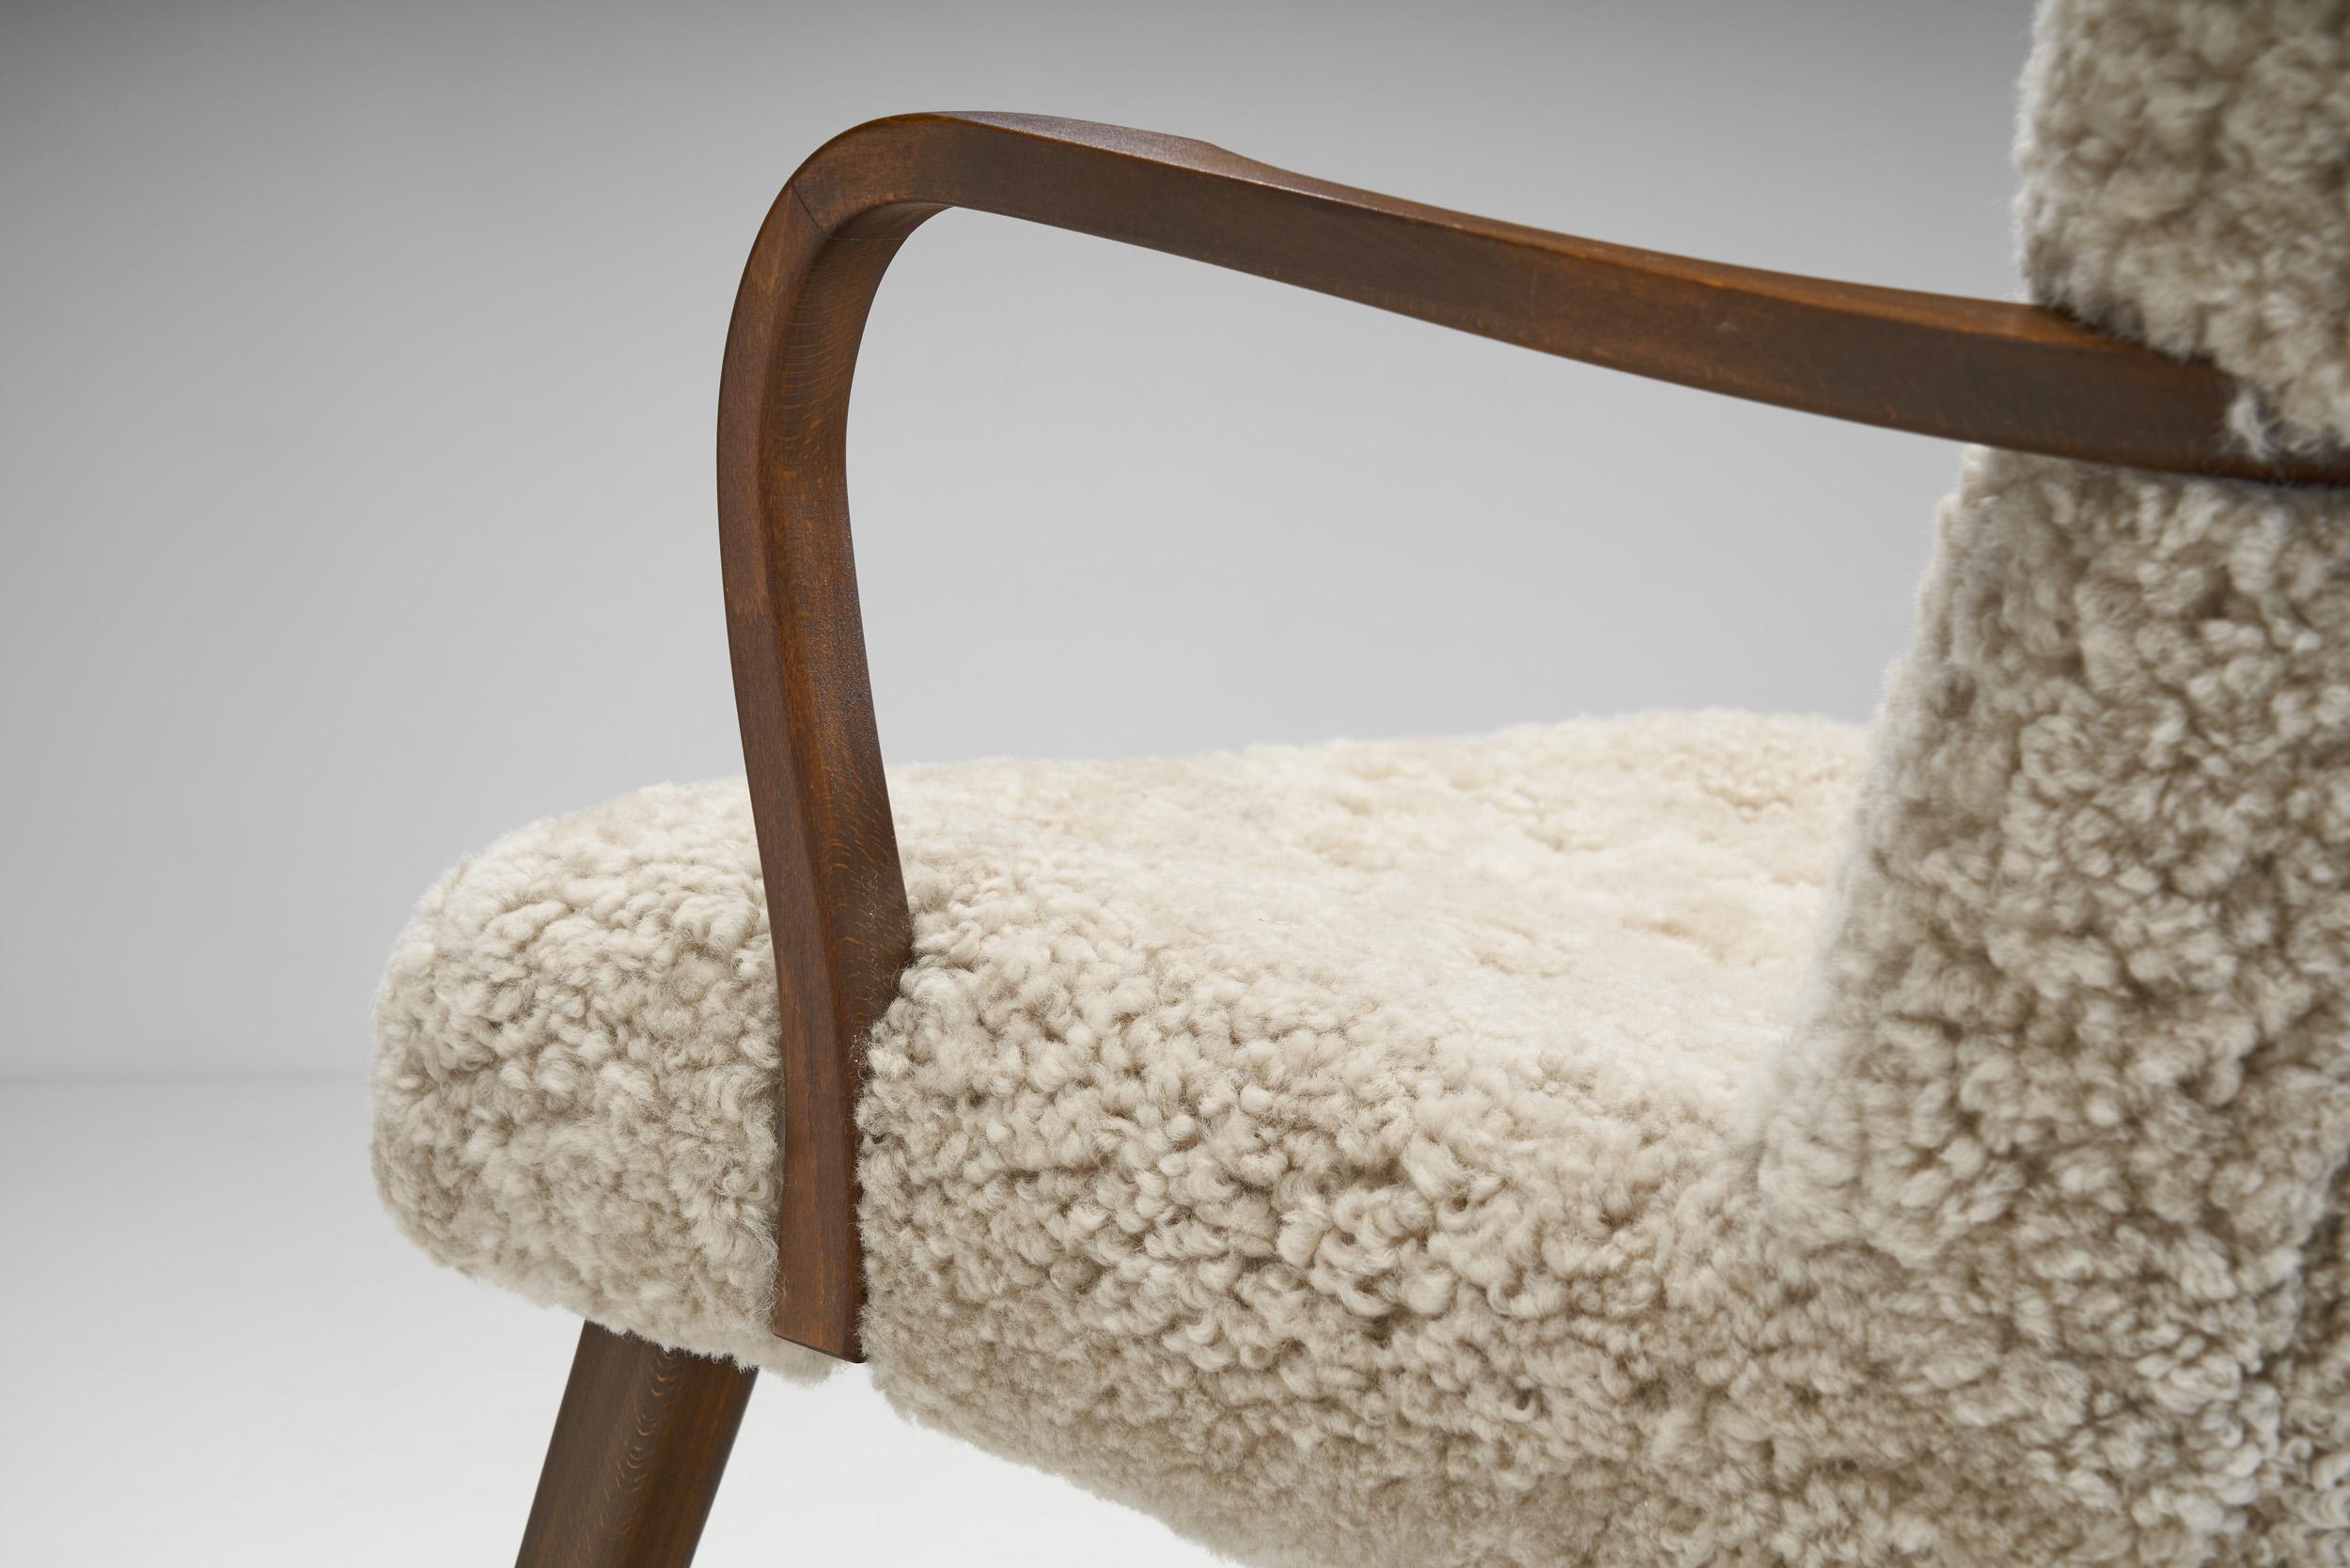 Stained Beech Easy Chairs in Sheepskin by a Danish Cabinetmaker, Denmark 1940s For Sale 9